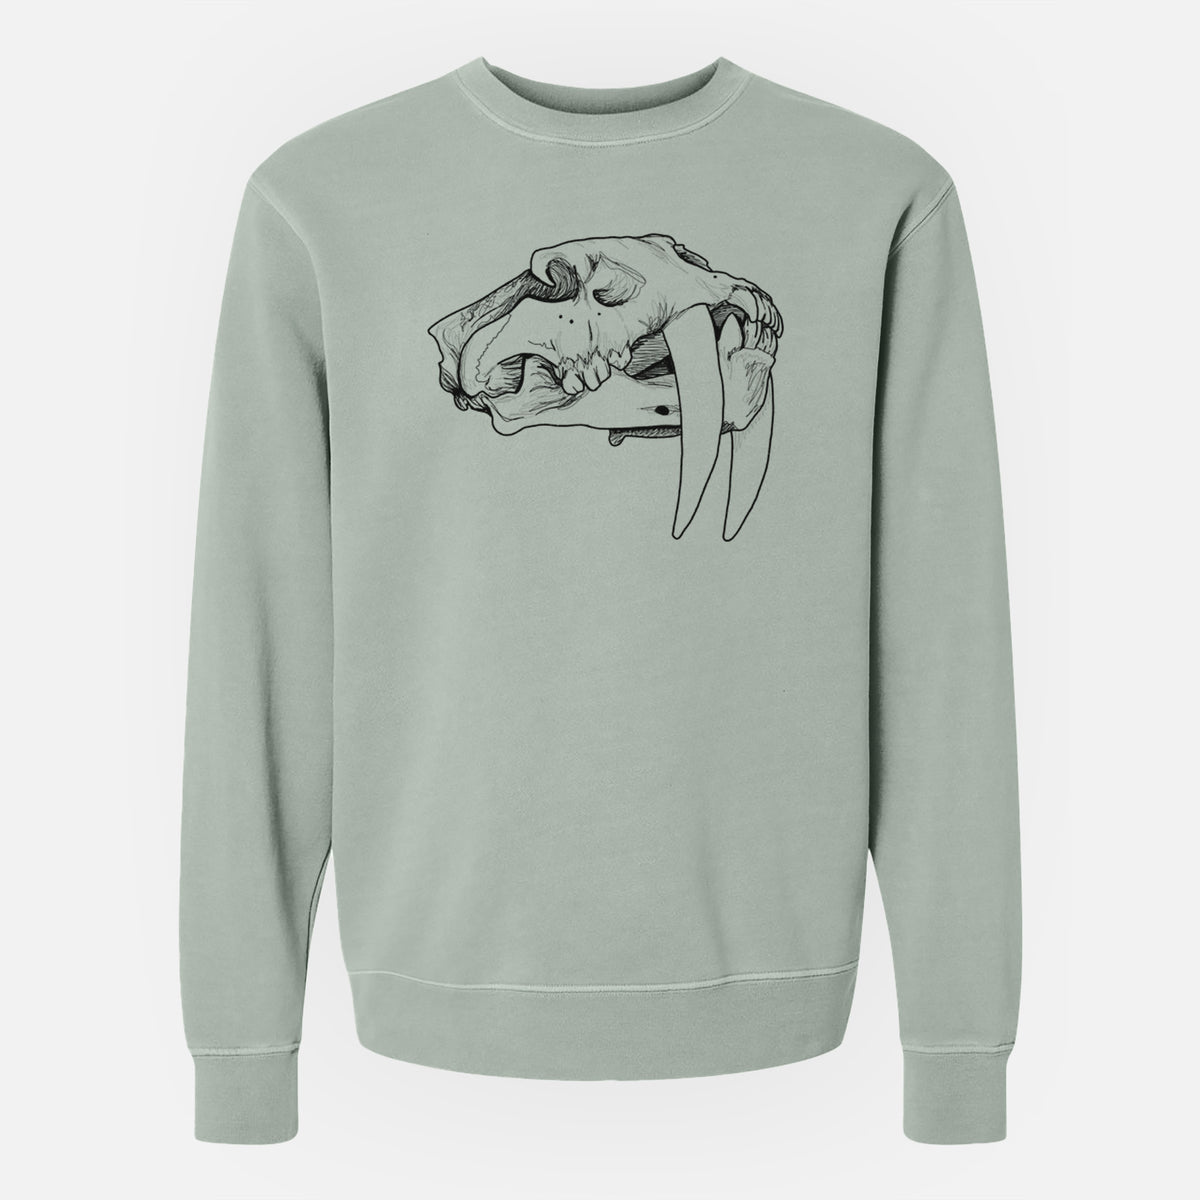 Saber-toothed Tiger Skull - Unisex Pigment Dyed Crew Sweatshirt